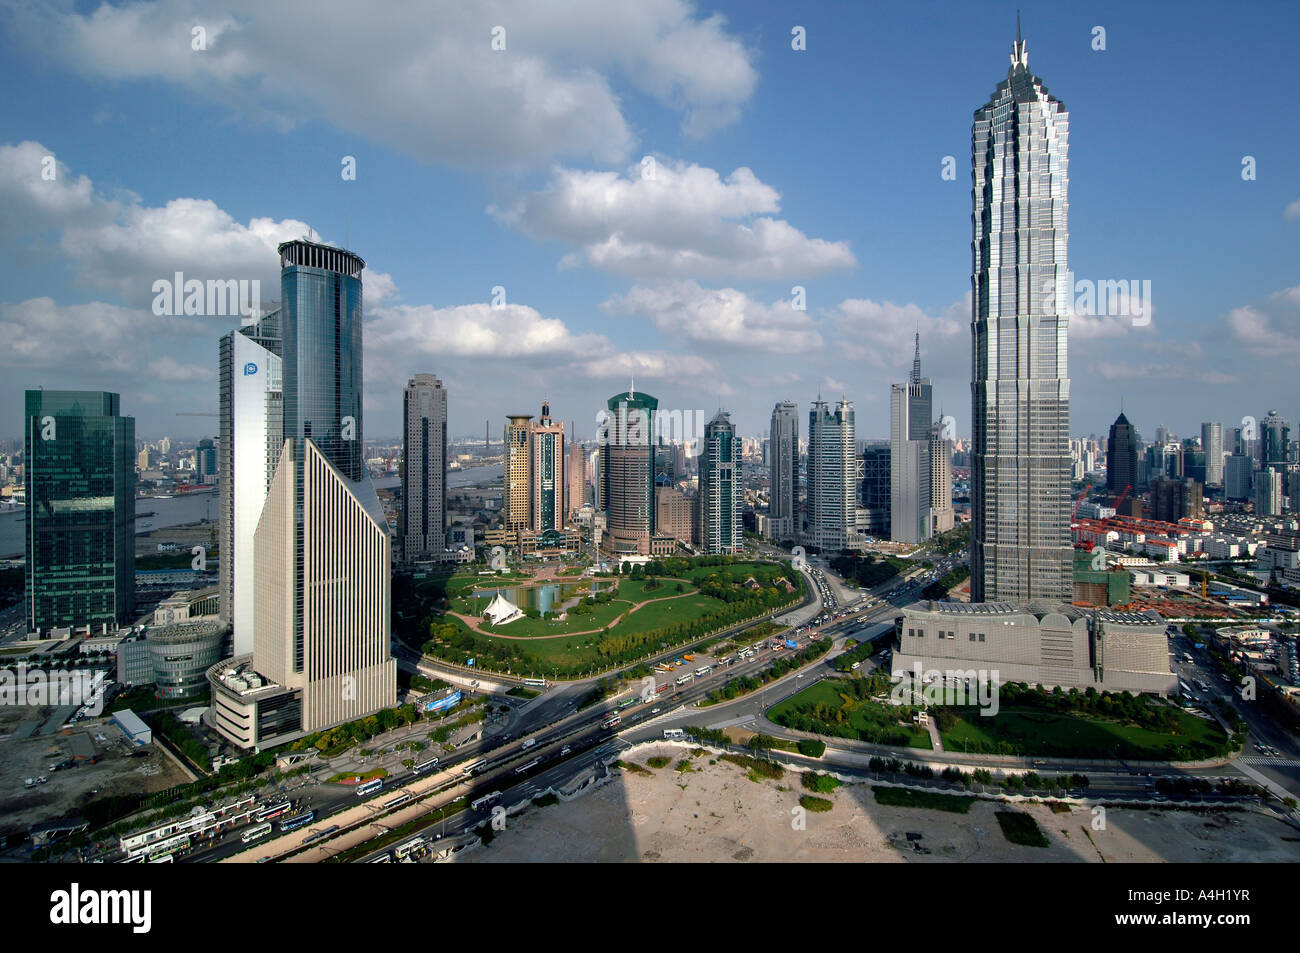 View of Pudong and the Jinmao Tower, Shanghai, China Stock Photo